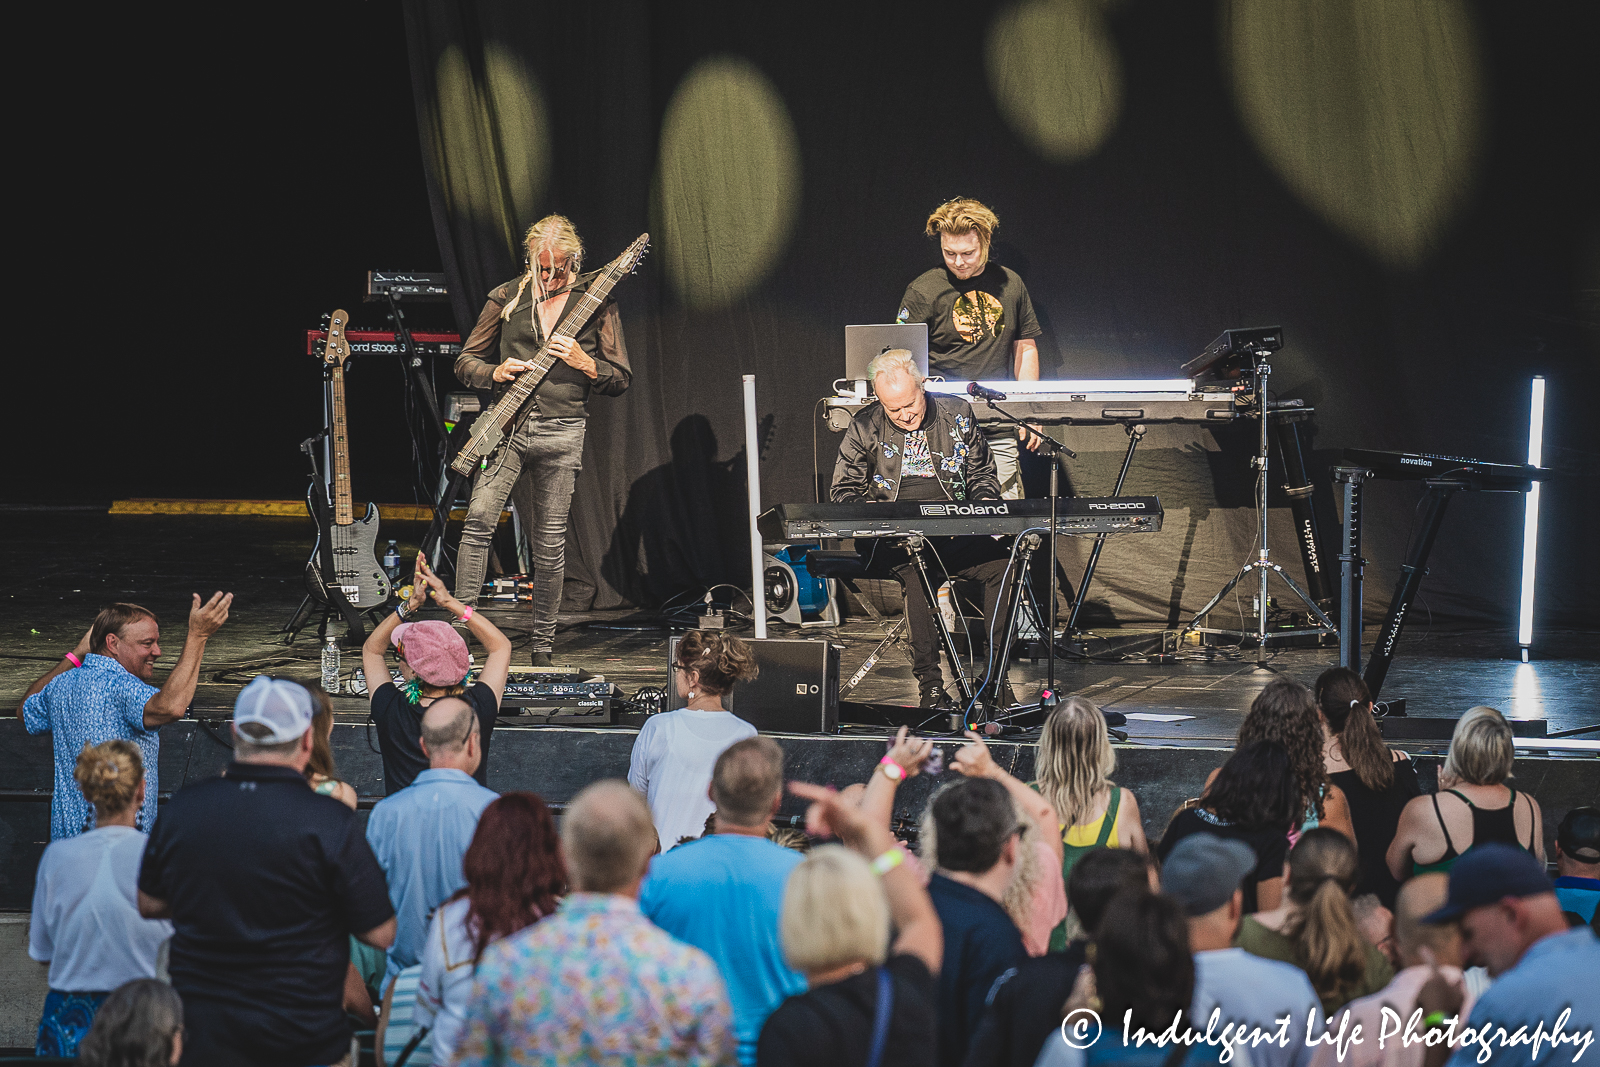 Howard Jones performing on the keyboard with Dan Clarke alongside and Nick Beggs of Kajagoogoo on bass guitar at Starlight Theatre in Kansas City, MO on August 8, 2023.